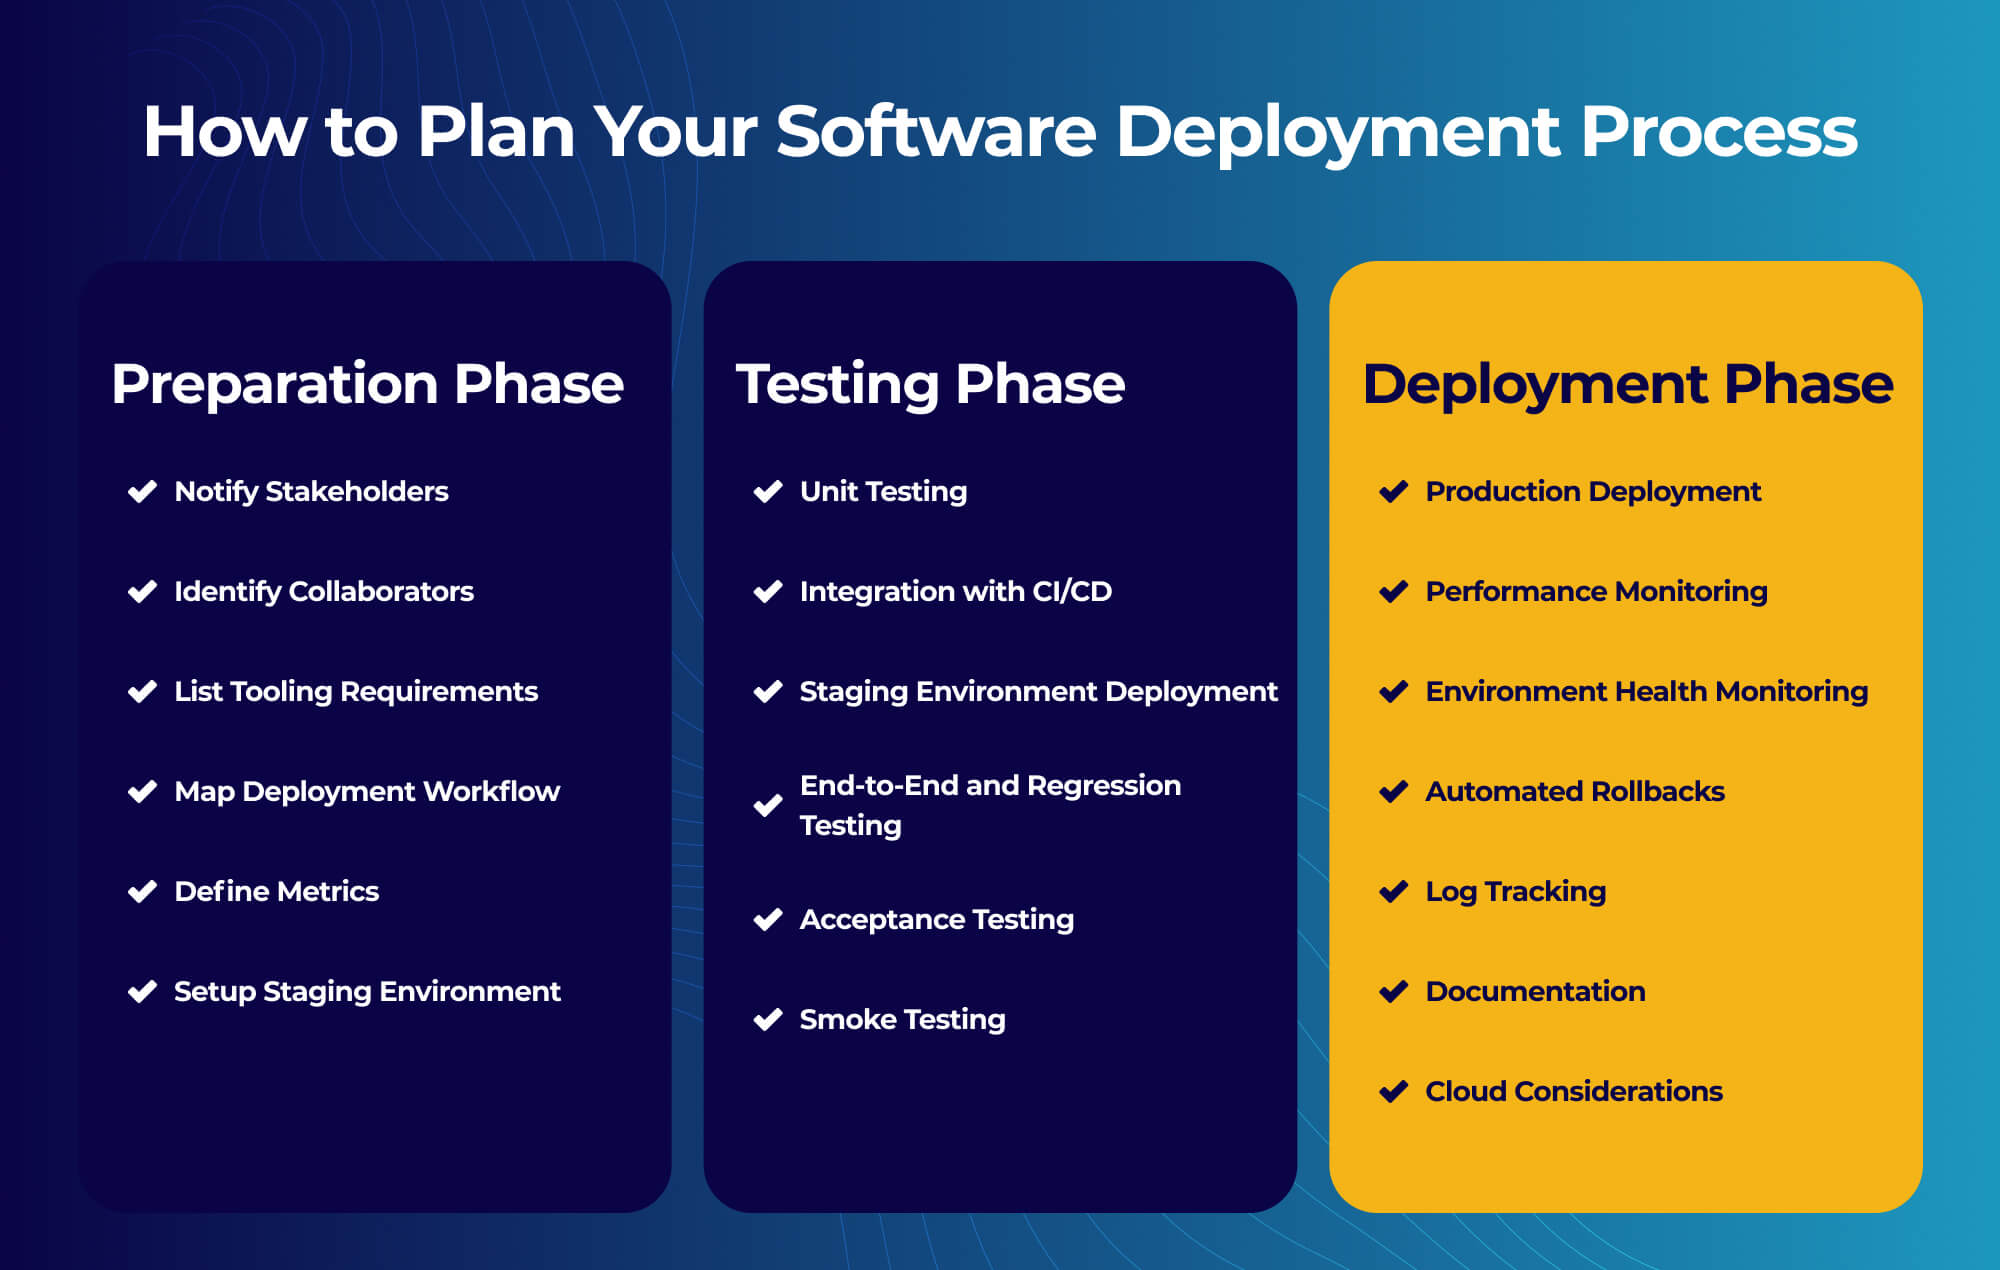 Ideamaker - How to Plan Your Software Deployment Process